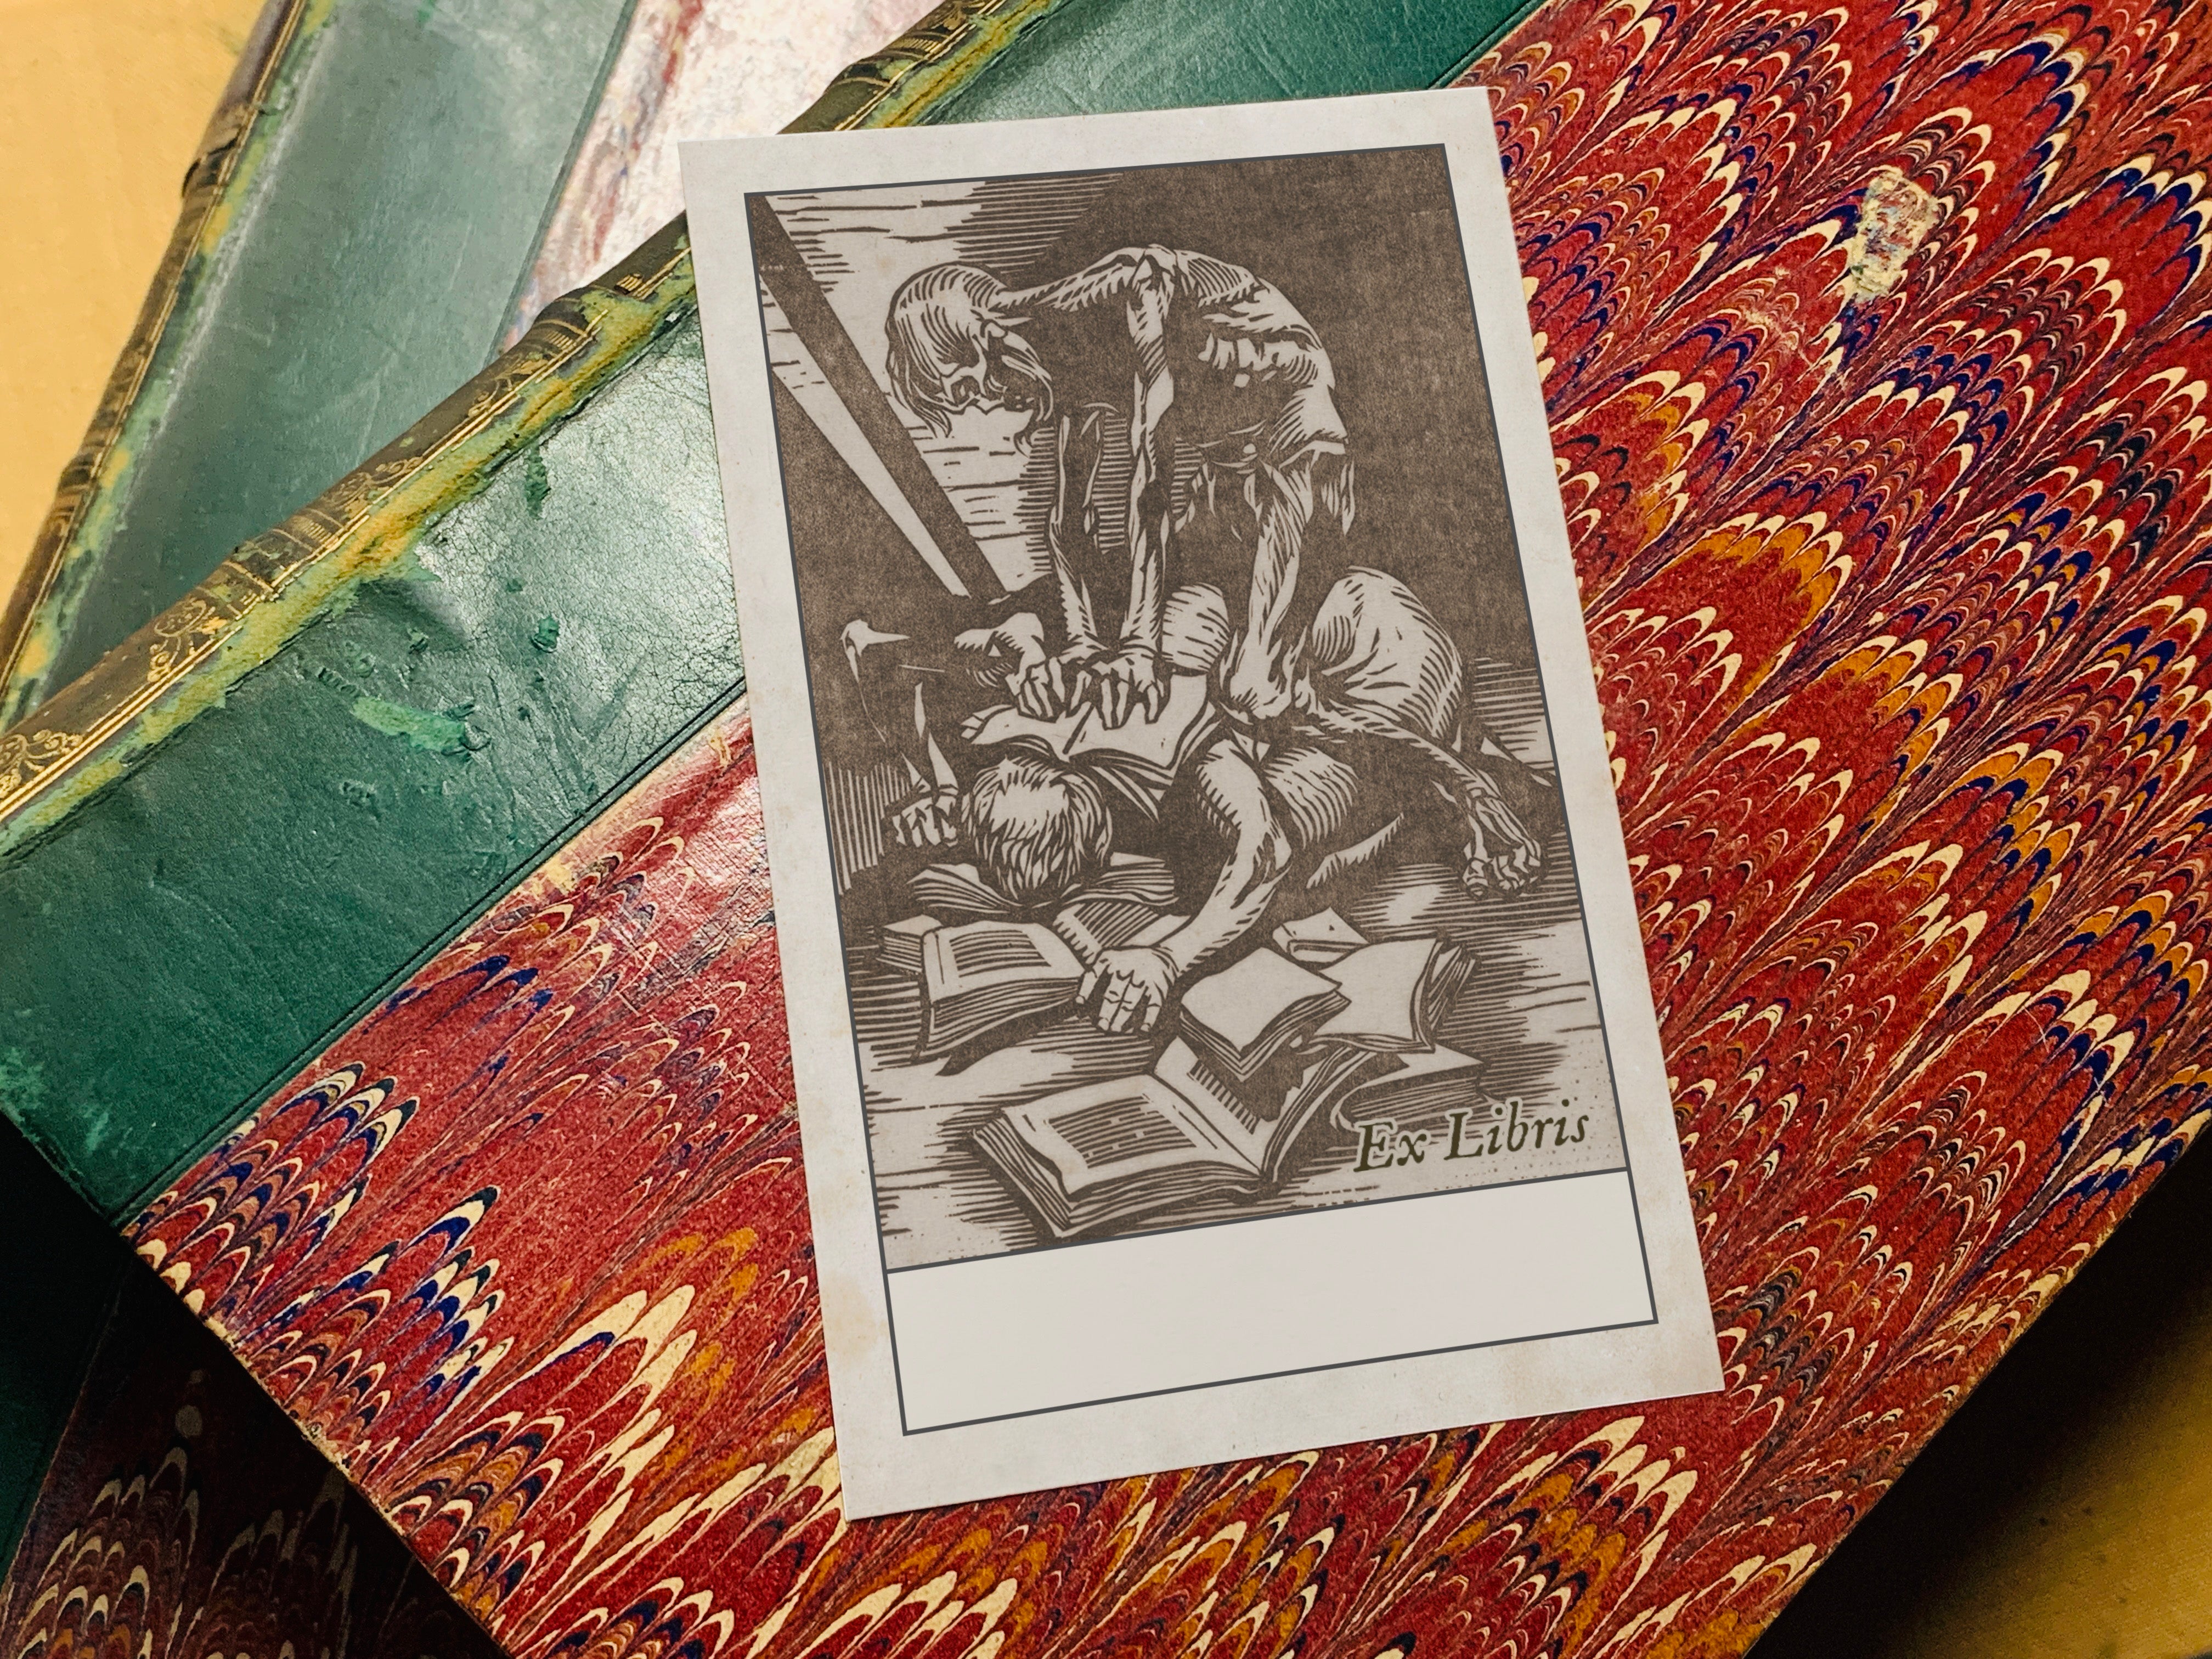 Death and Victim, Dark Academia, Personalized Ex-Libris Bookplates, Crafted on Traditional Gummed Paper, 2.5in x 4in, Set of 30